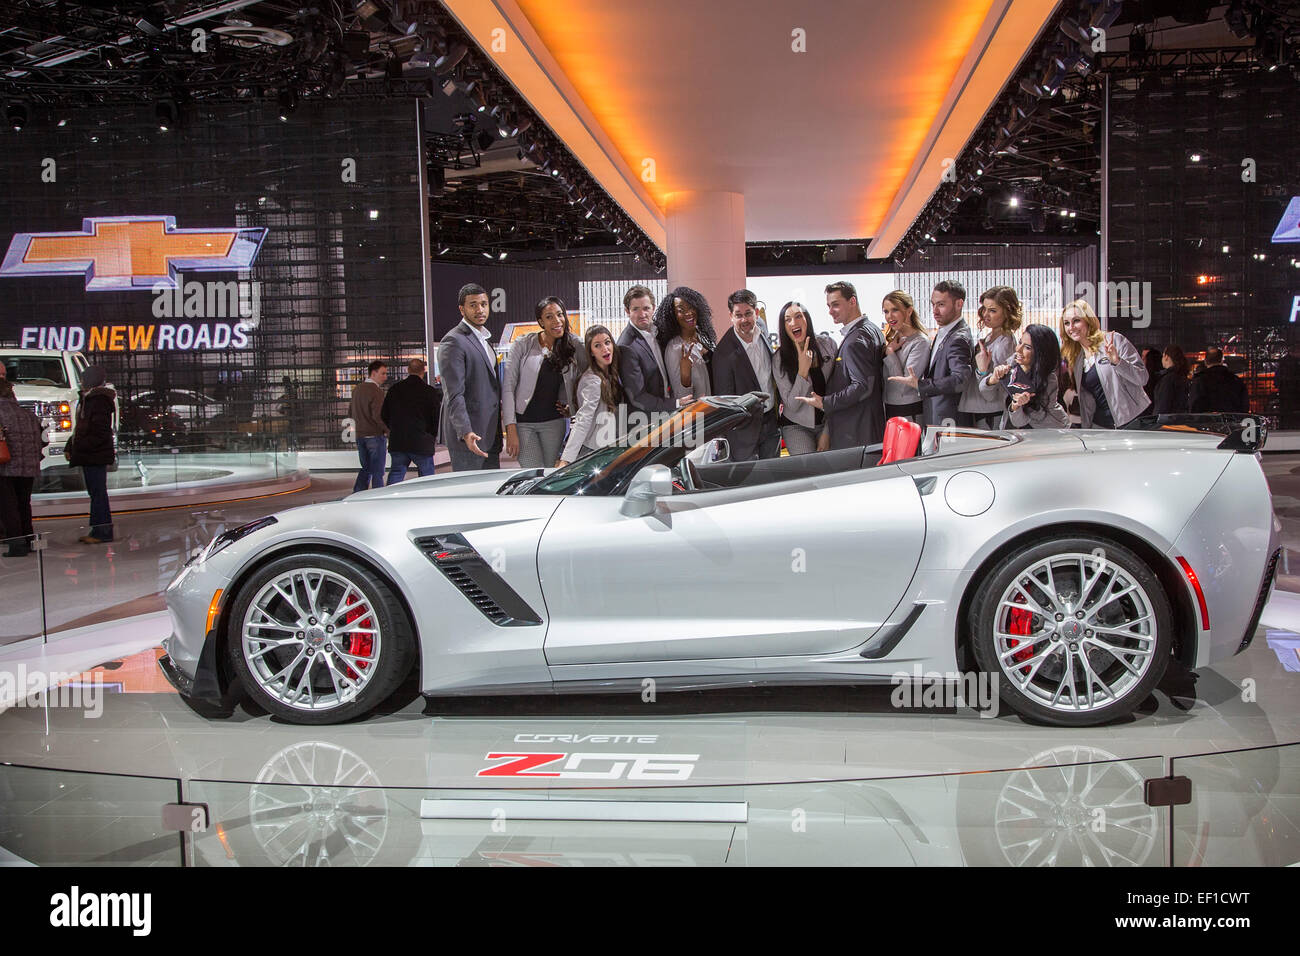 Detroit, Michigan - The Chevrolet Corvette Z06 on display at the North American International Auto Show. Stock Photo